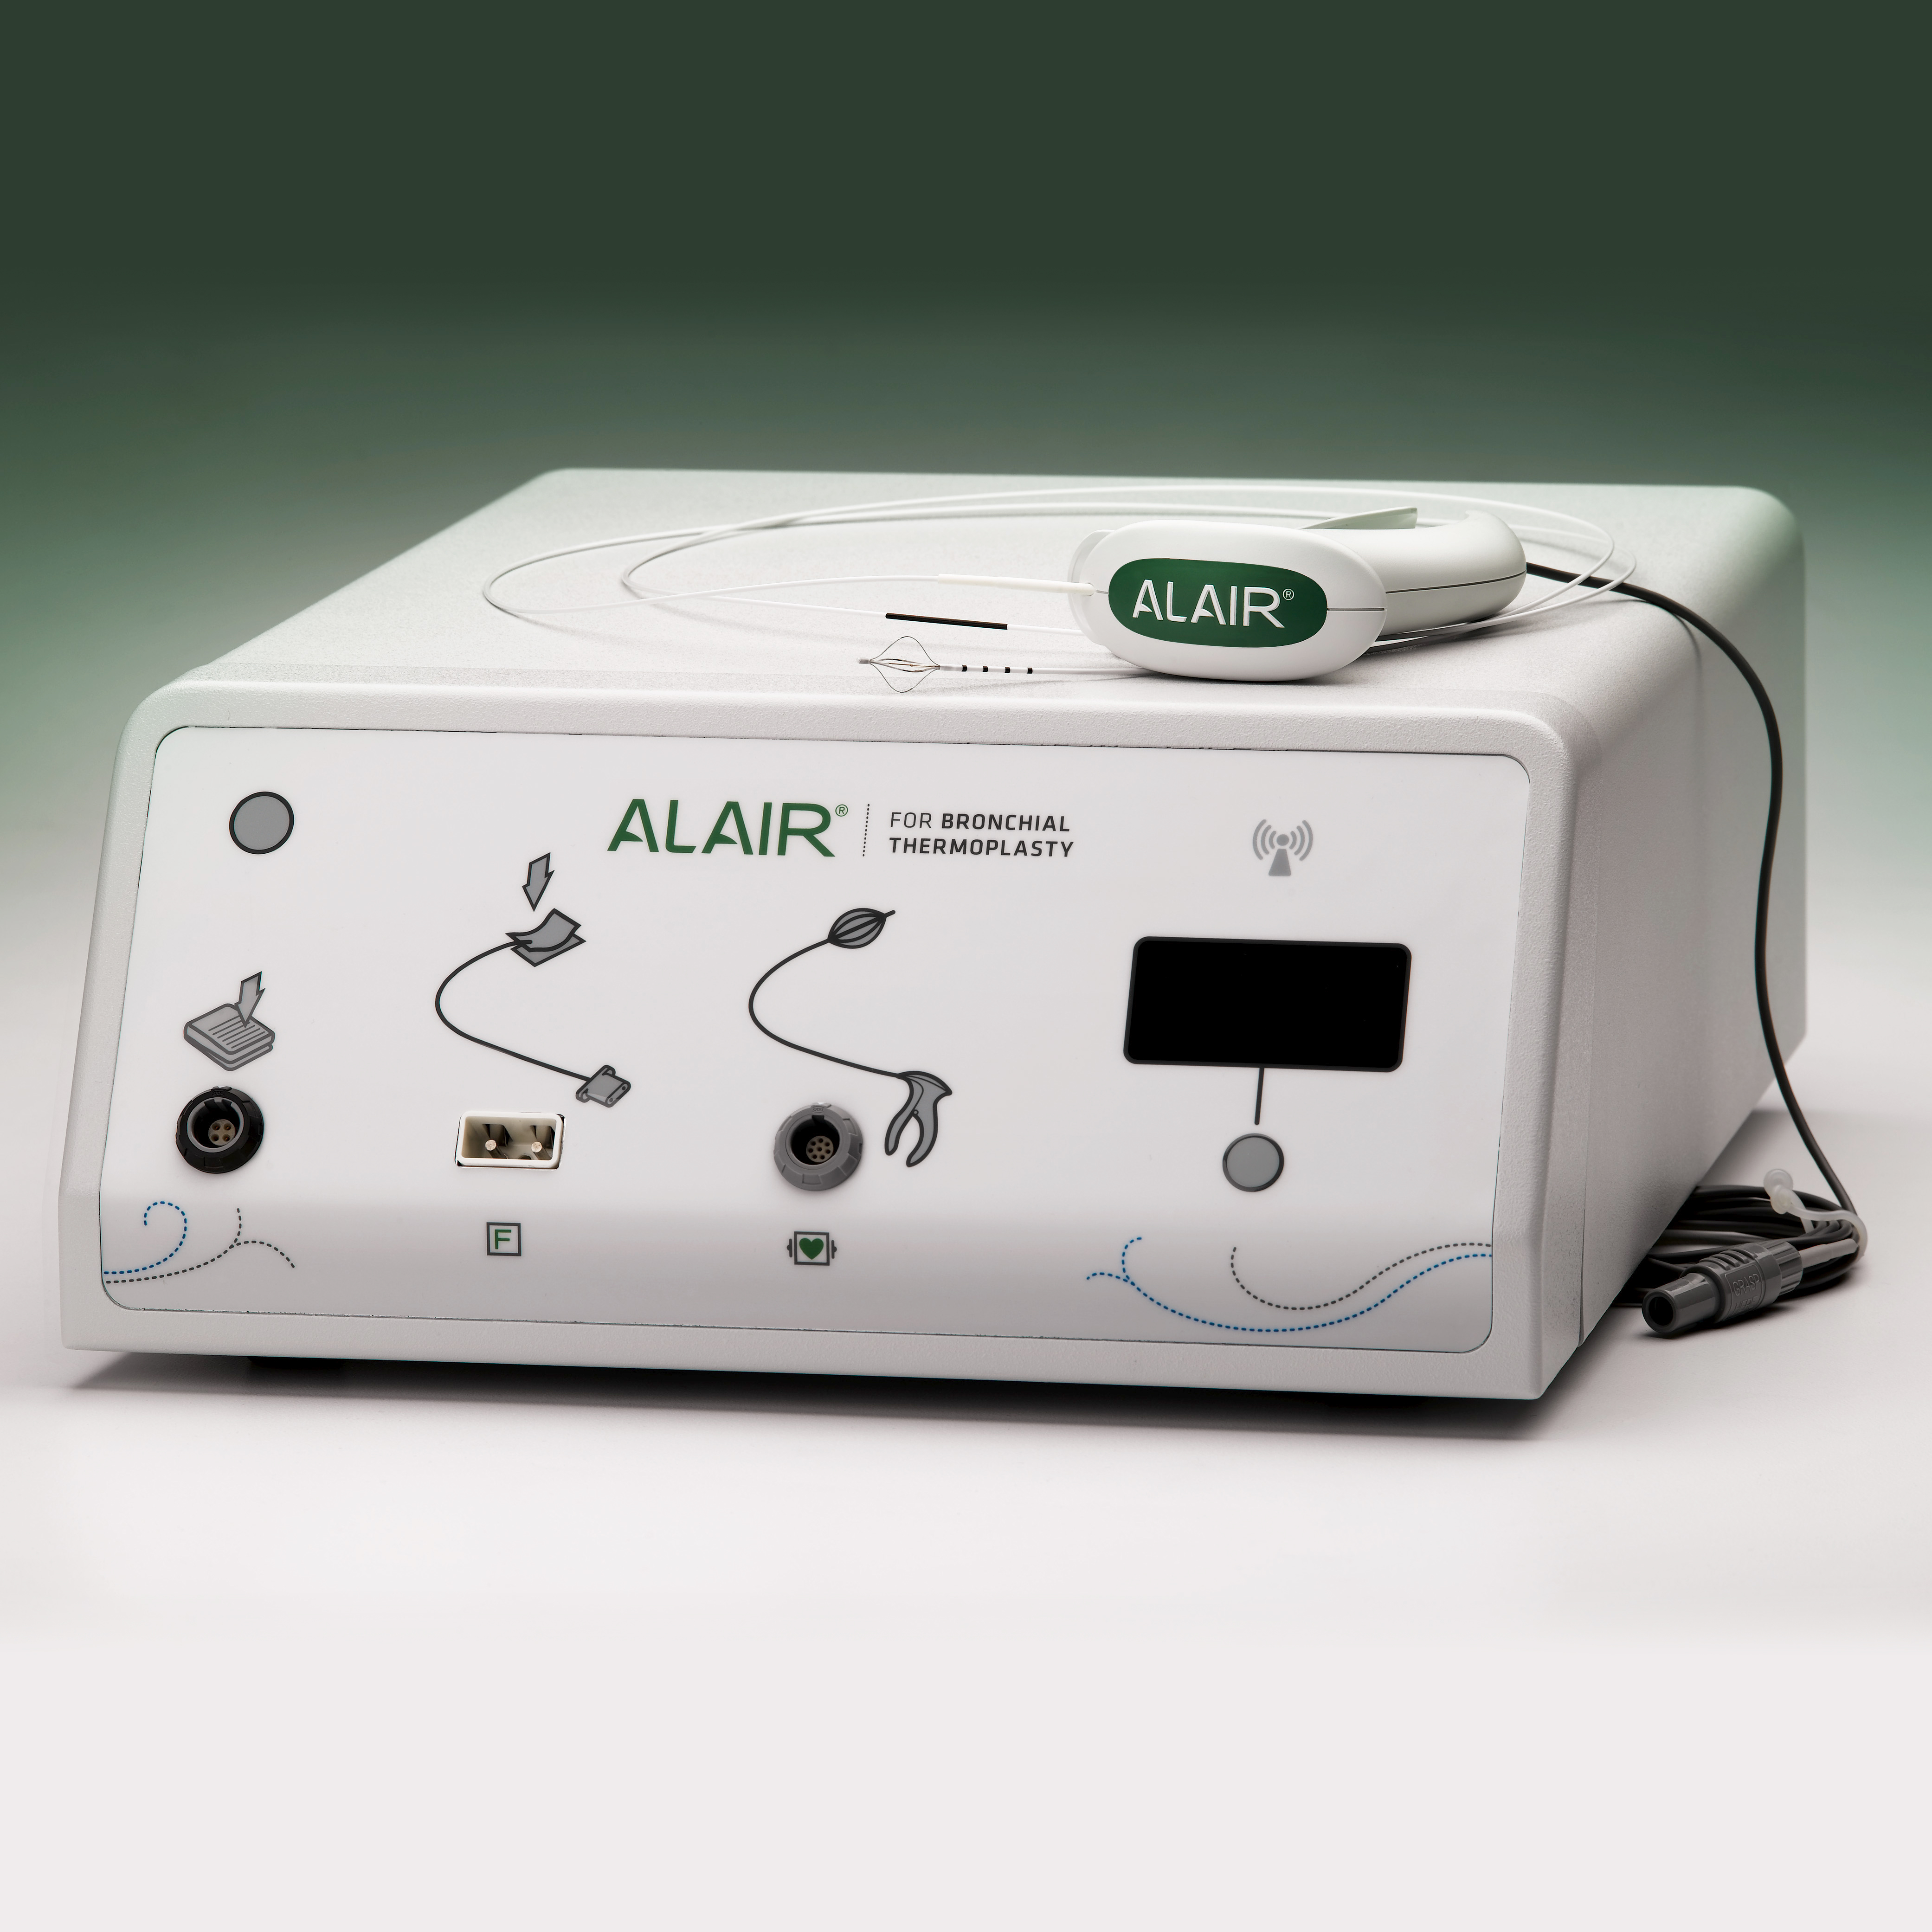 The Complete Alair Bronchial Thermoplasty System